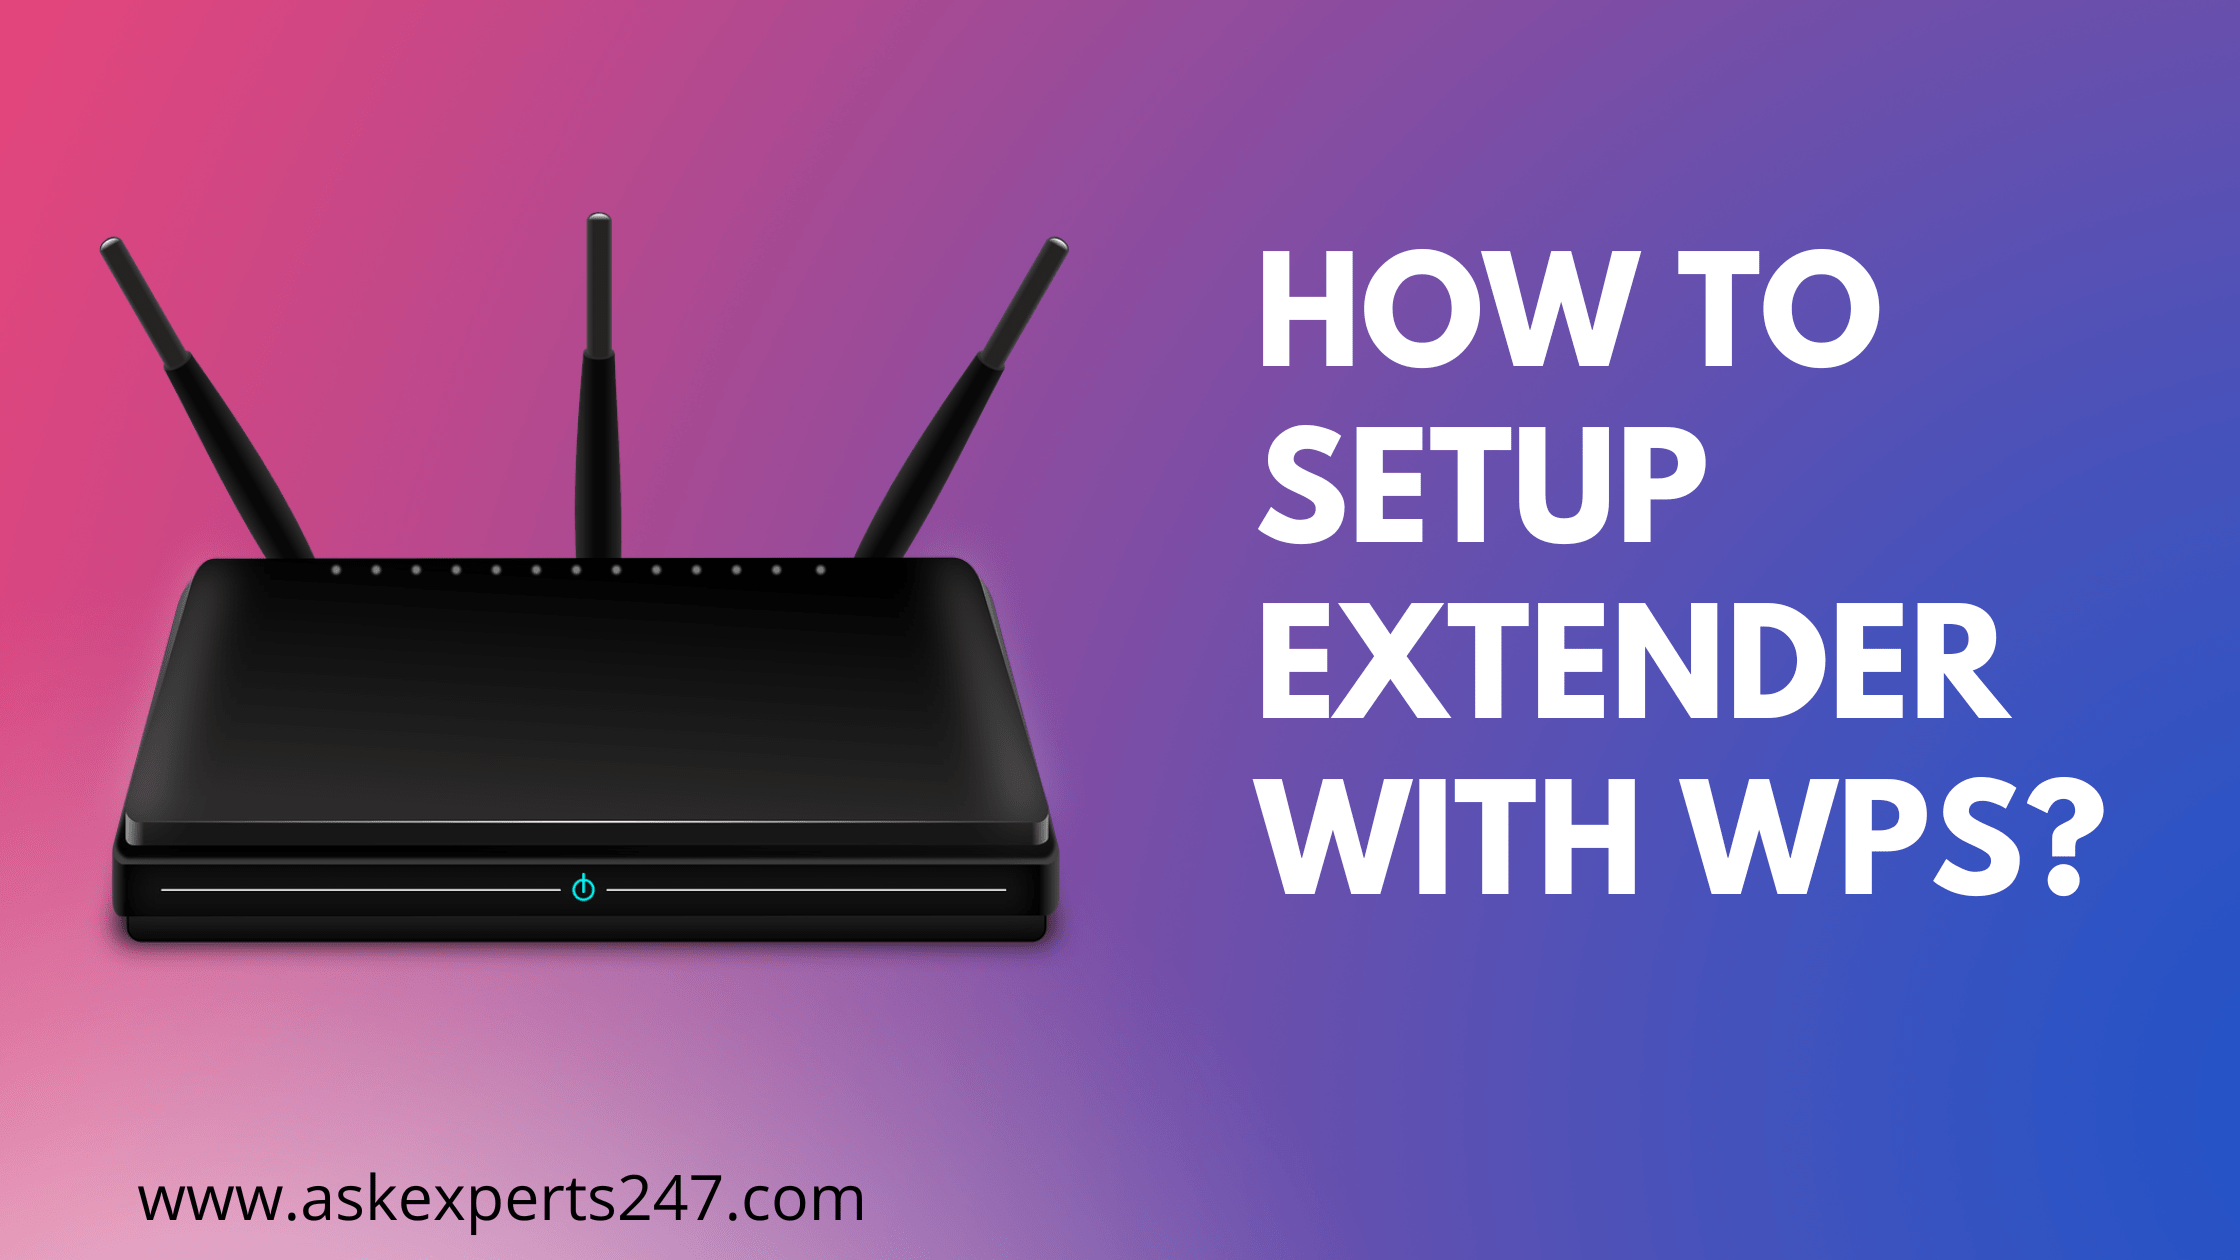 How to Setup Extender with WPS